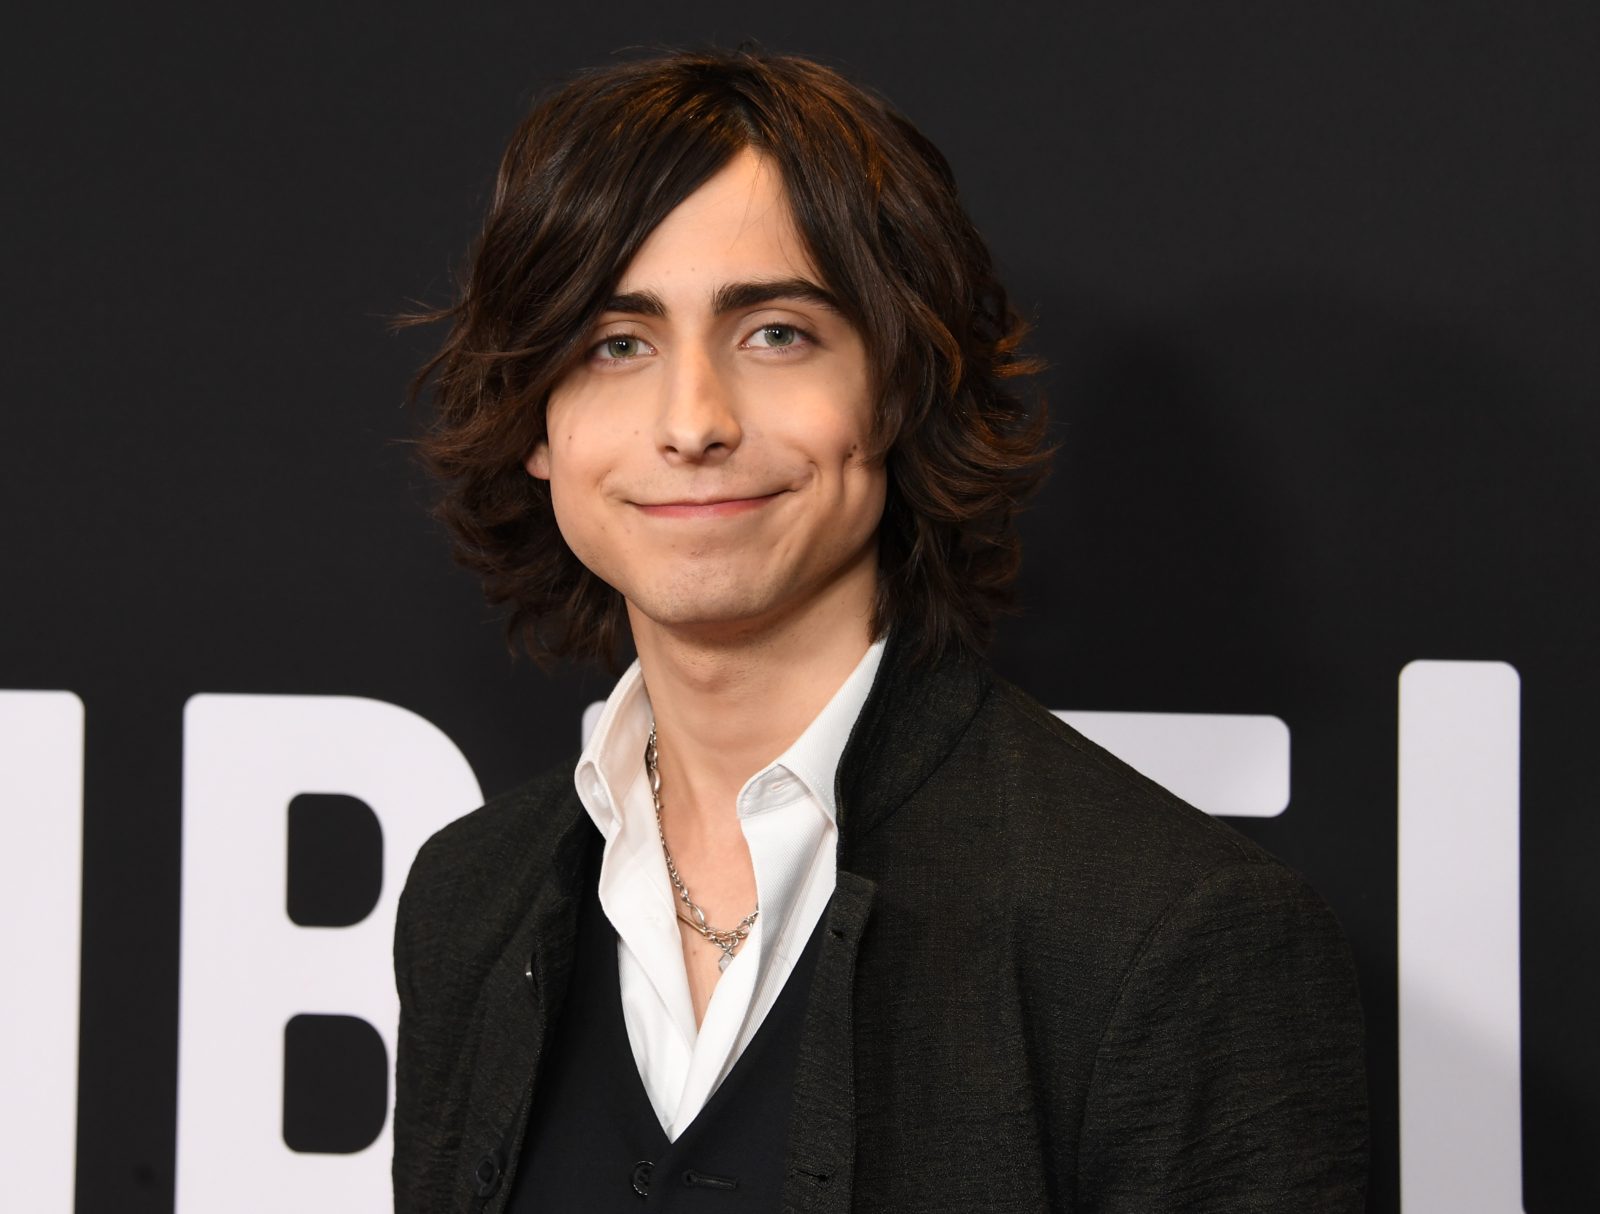 Aidan Gallagher Biography Height Weight Age Movies Wife Family Salary Net Worth Facts More